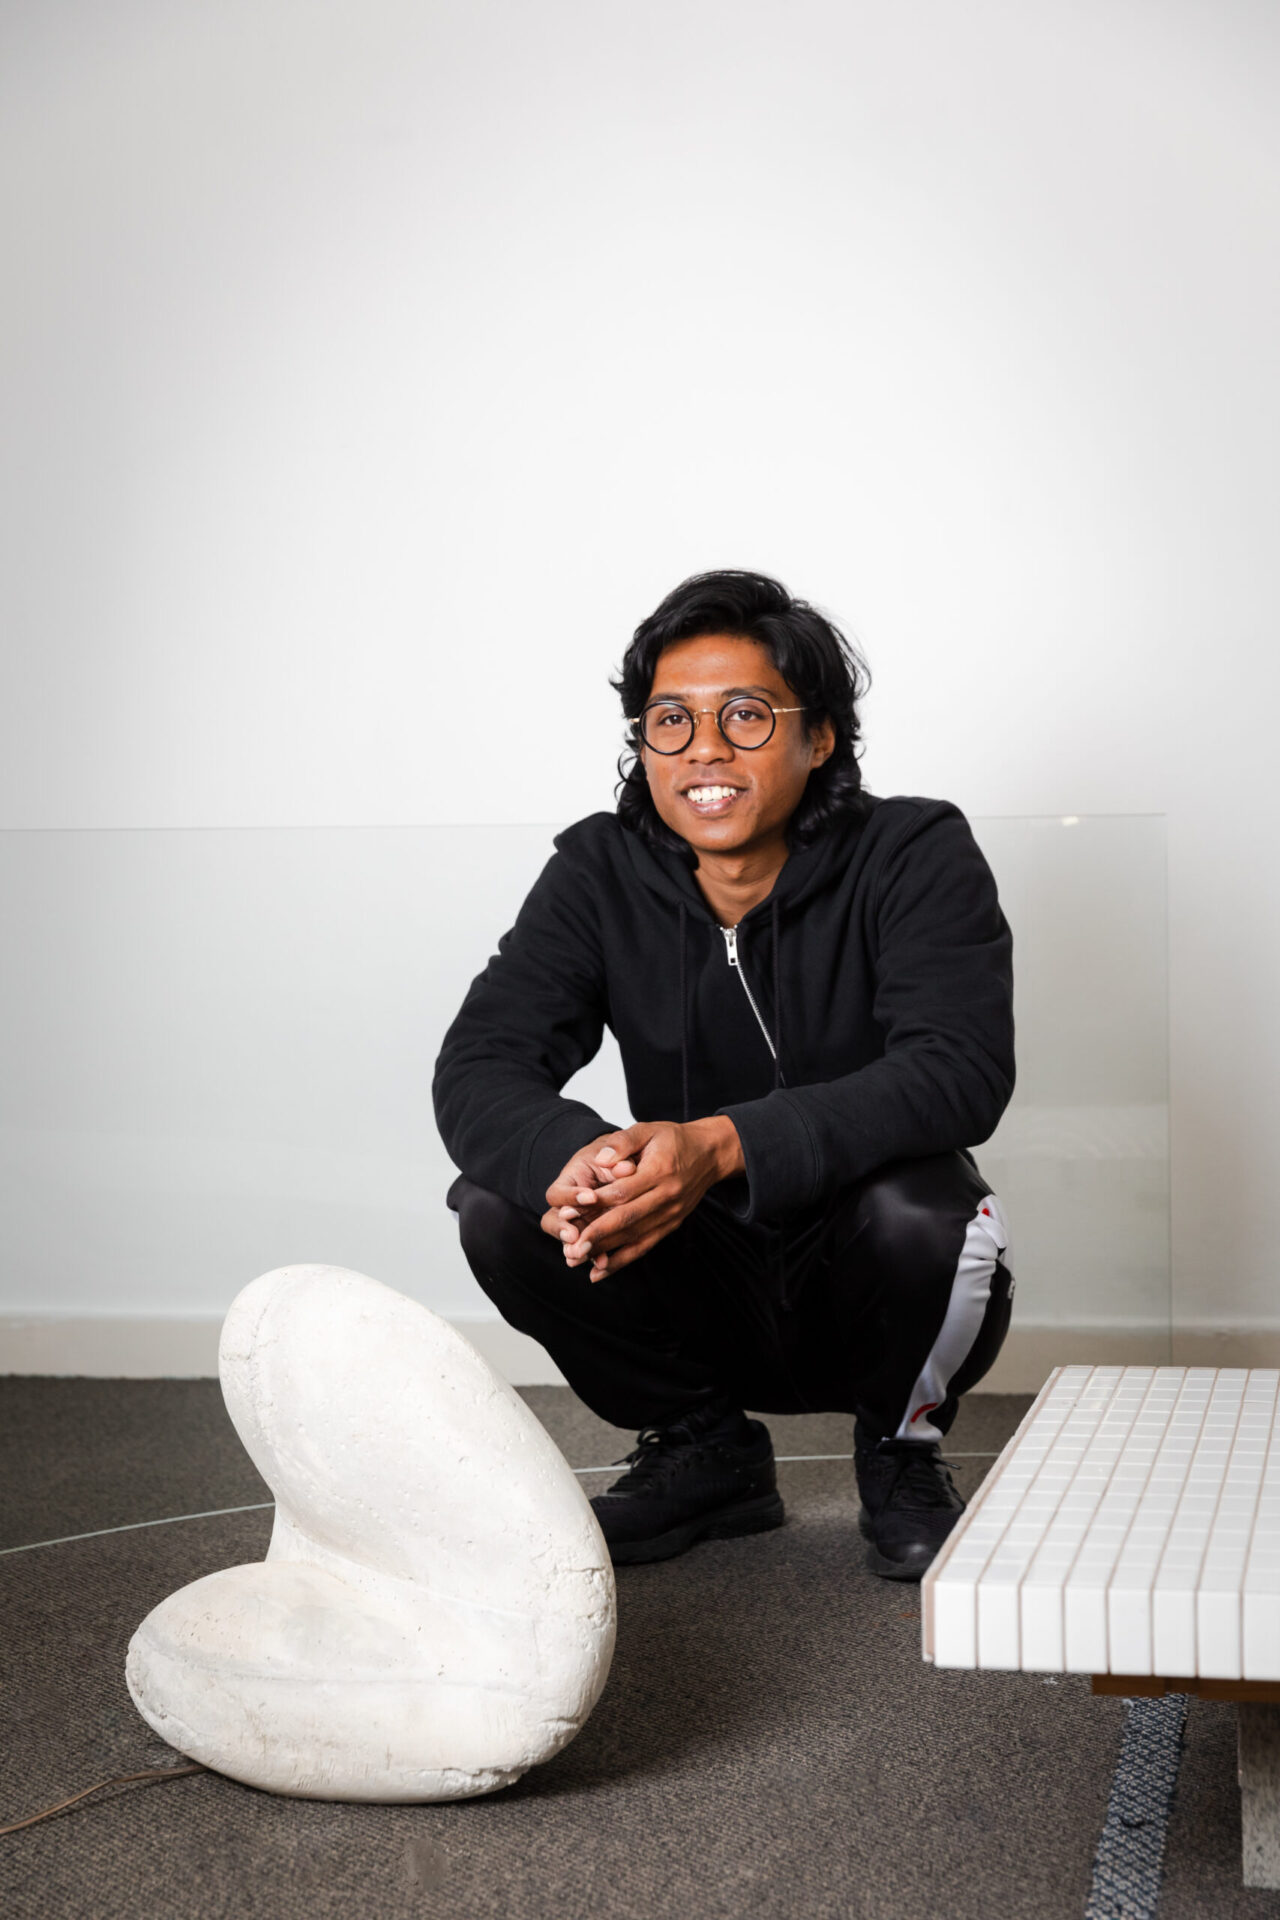 Akil is crouching on the floor indoors, positioned behind a solid curved white sculpture and wearing a black tracksuit and round framed glasses.